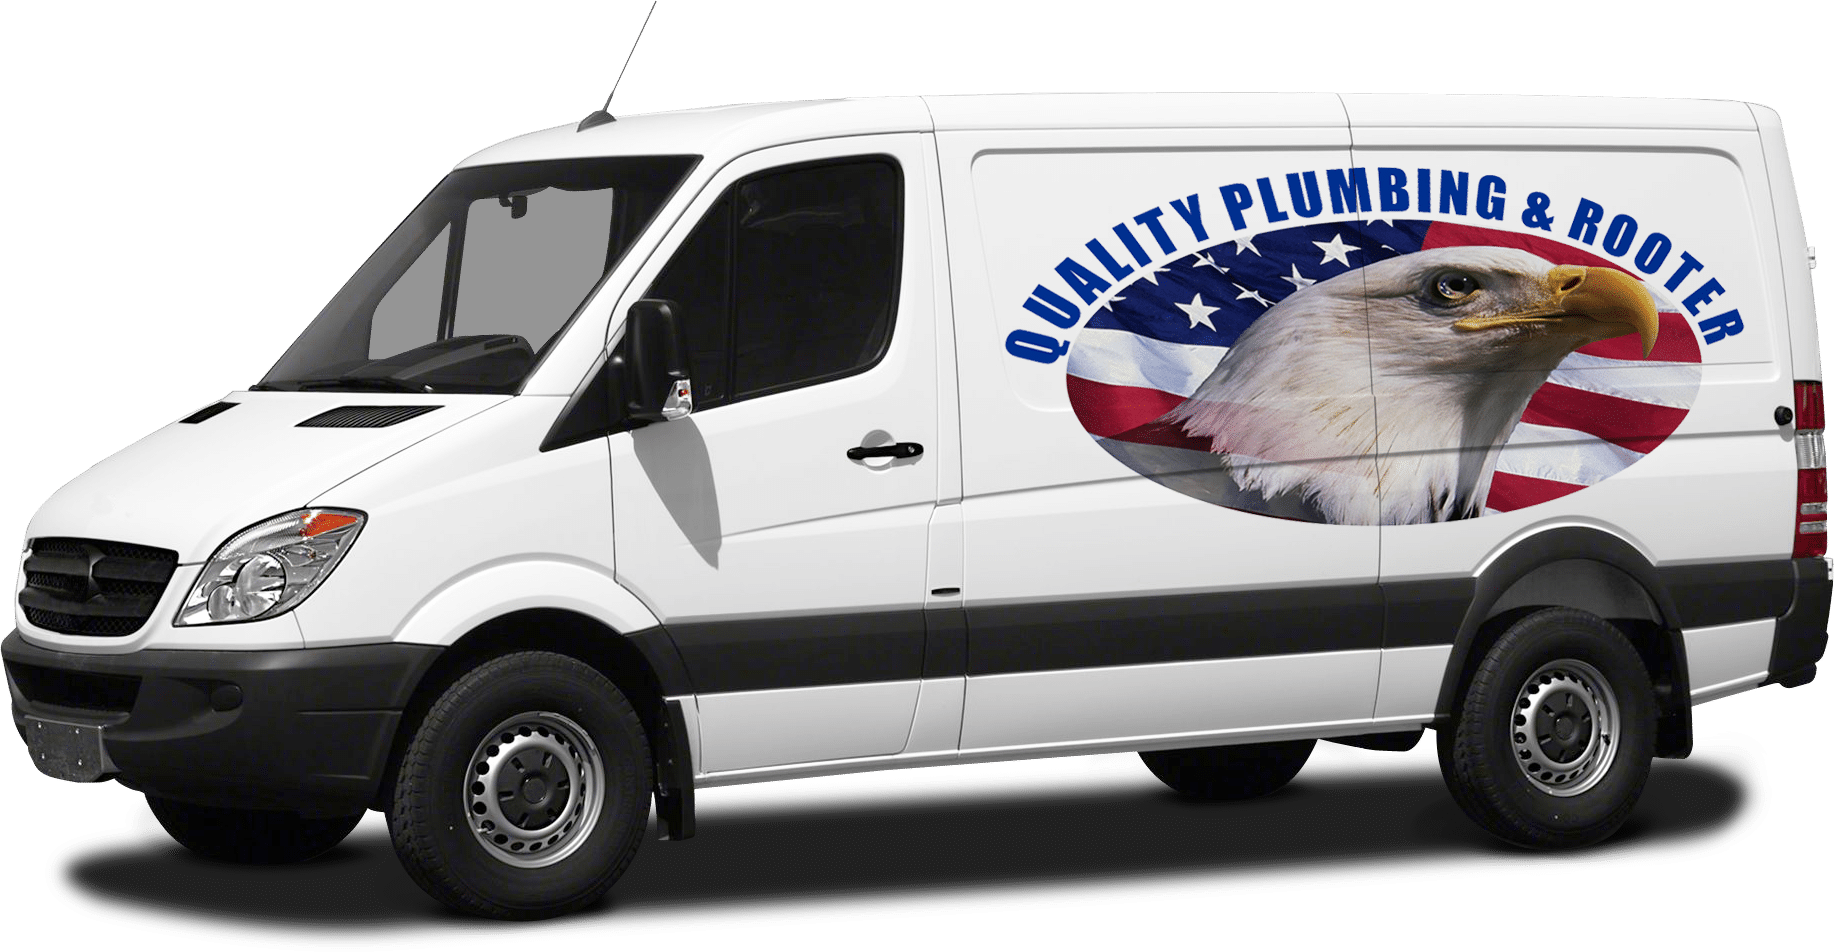 Quality Plumbing & Rooter, Inc. in Antioch, CA